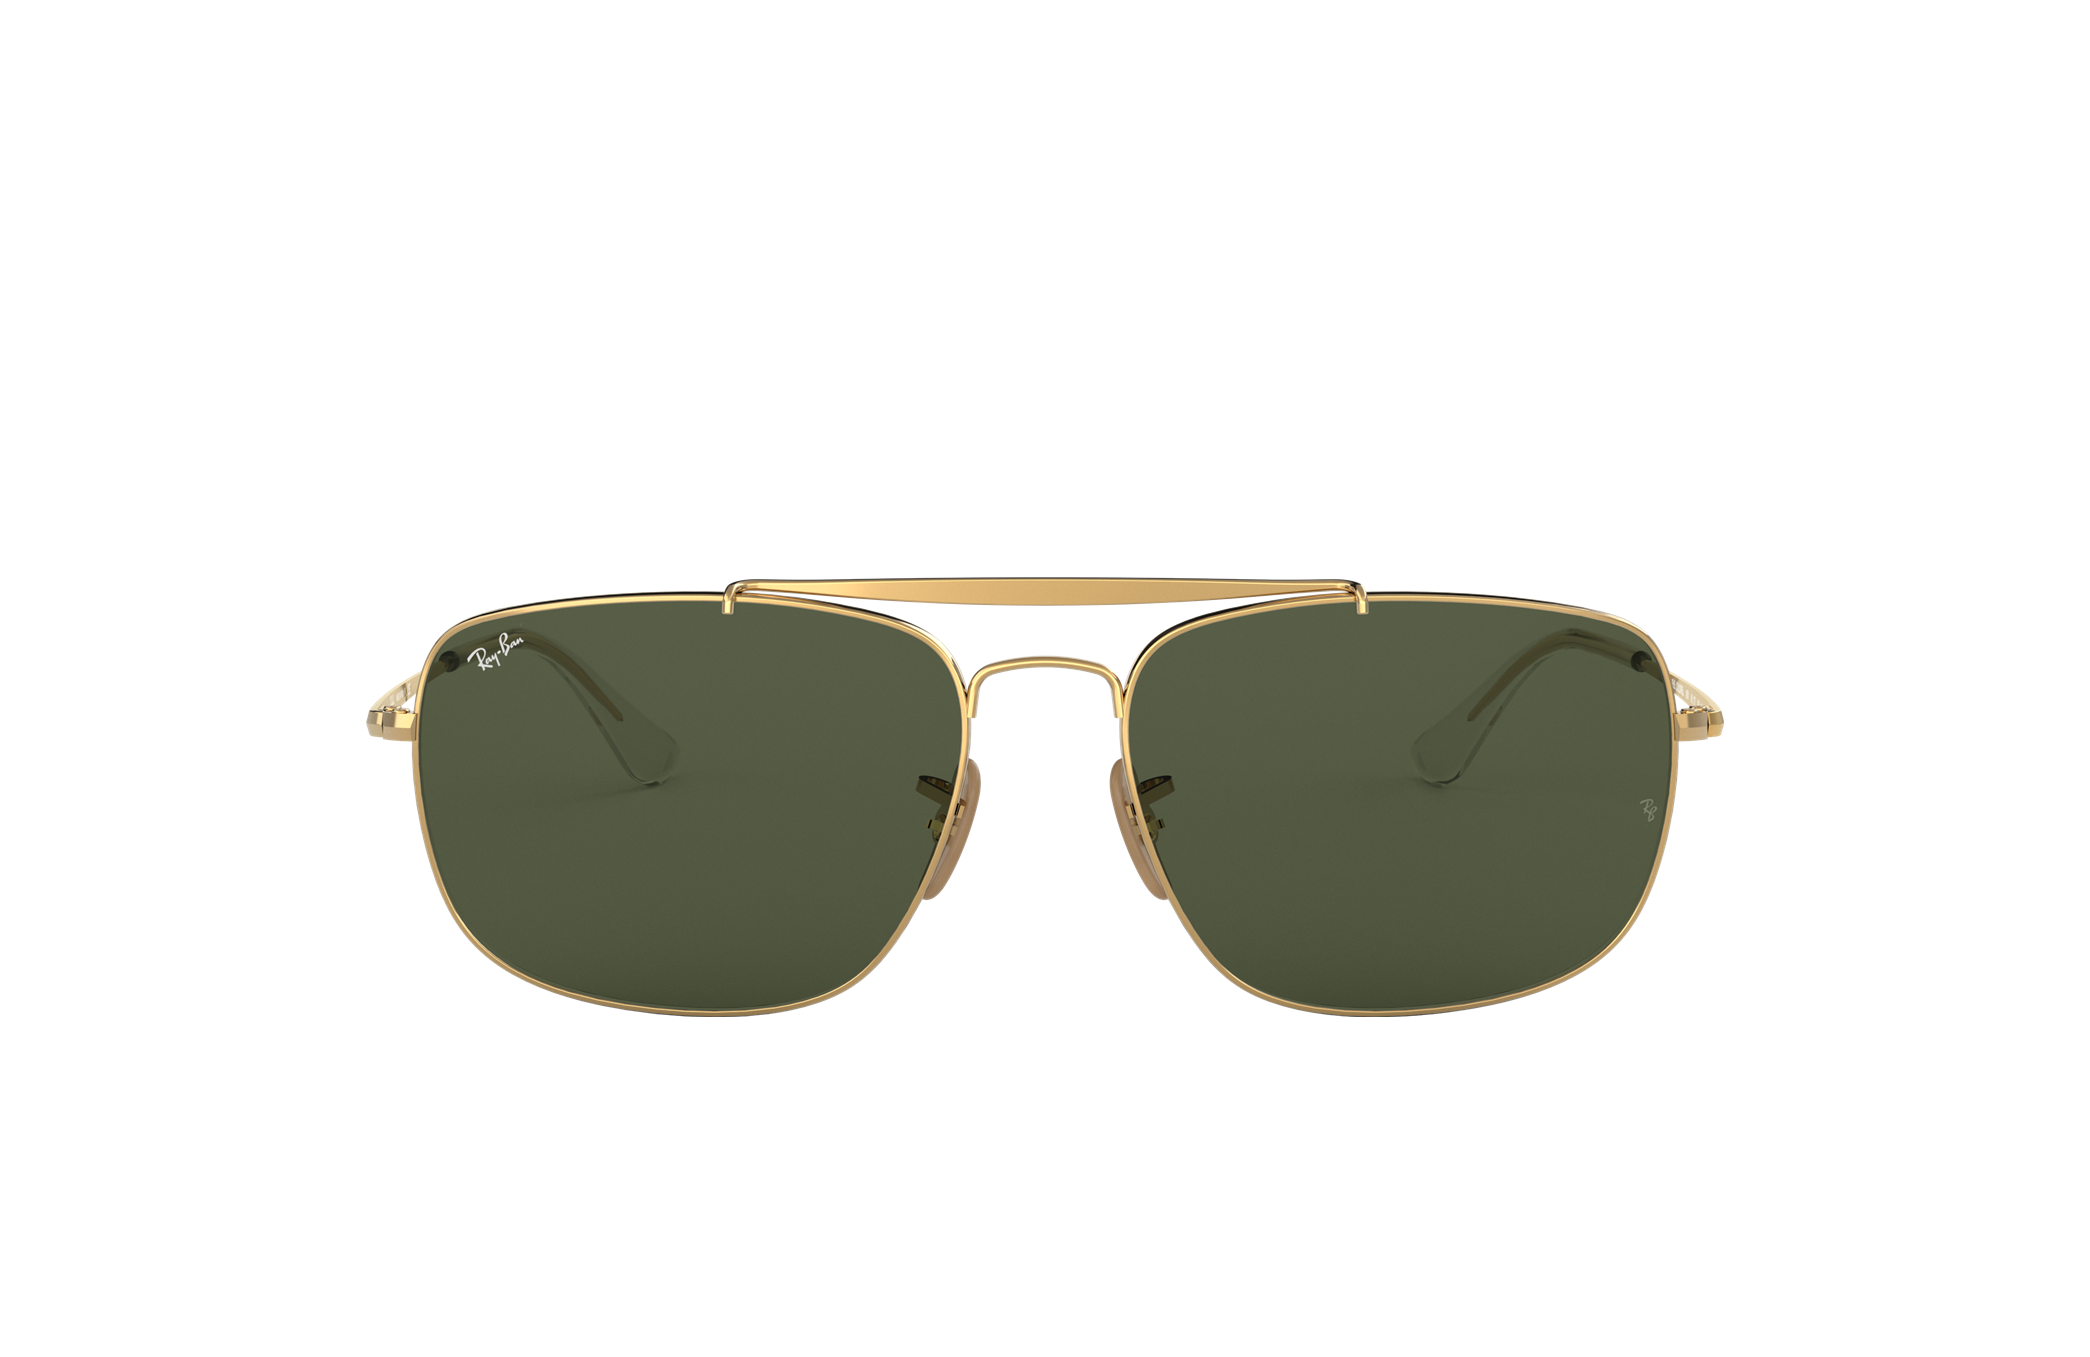 colonel ray ban